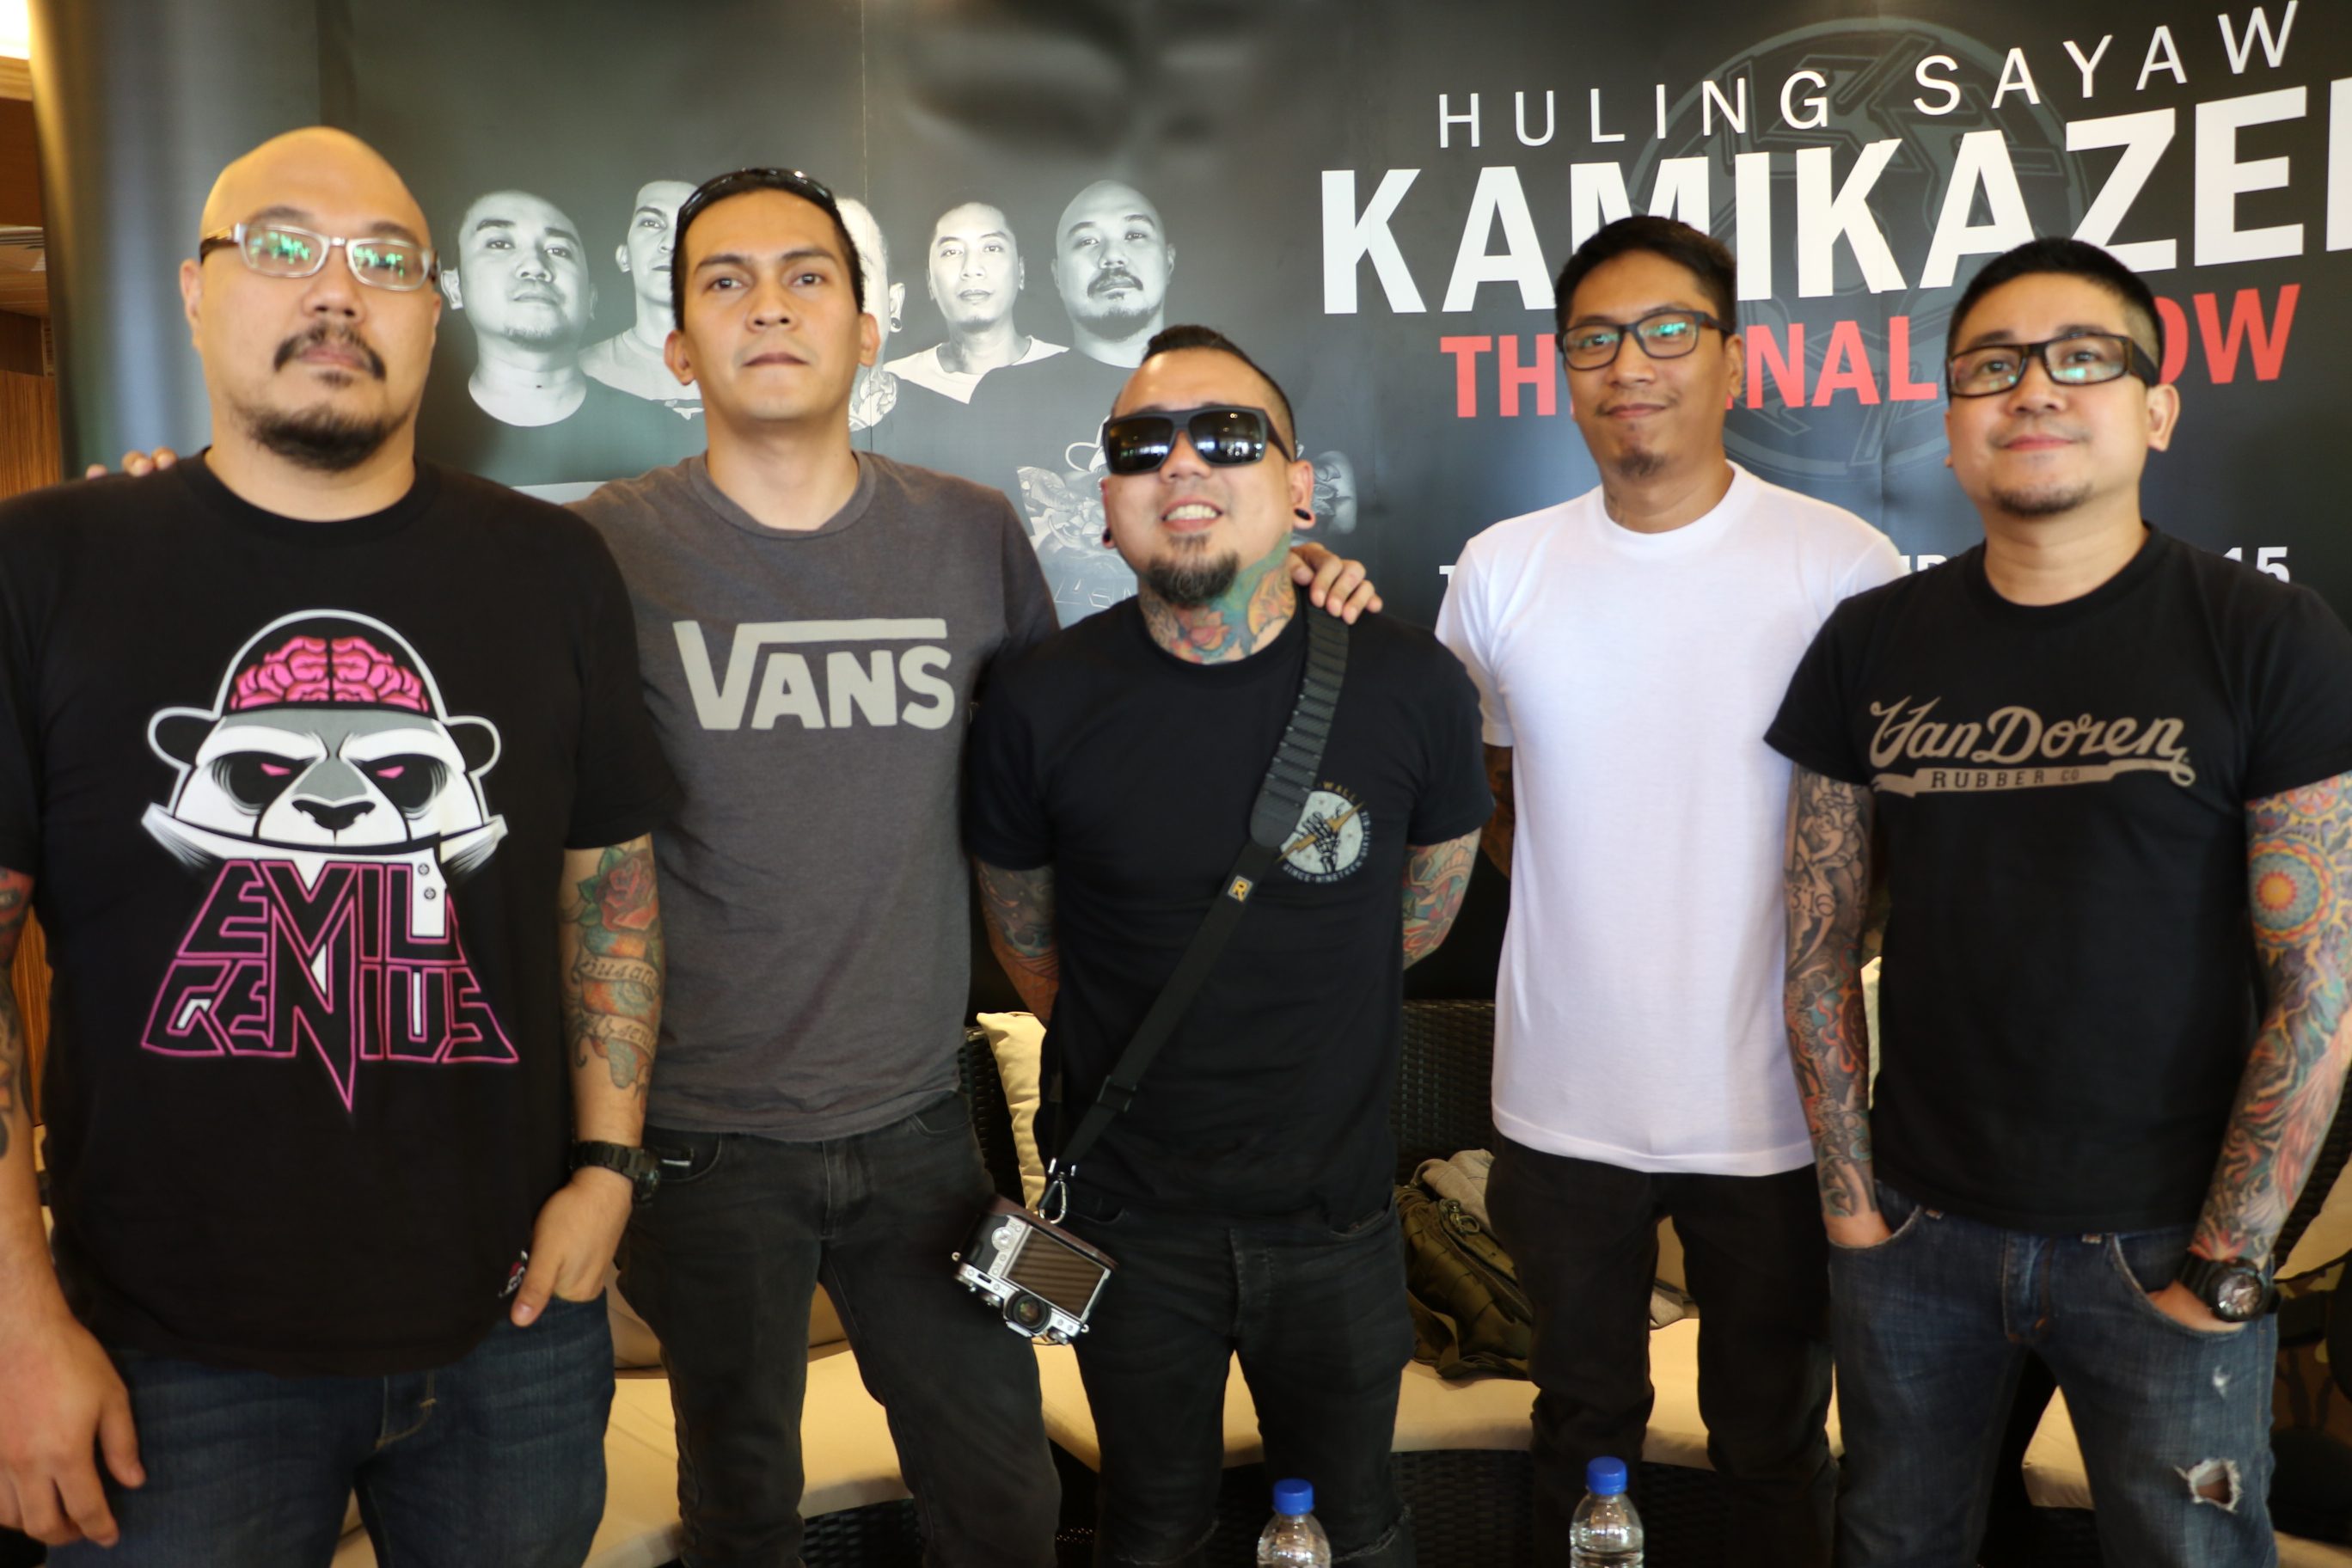 15 YEARS. Kamikazee at their interview with media. Photo by Sheen Seeckts 